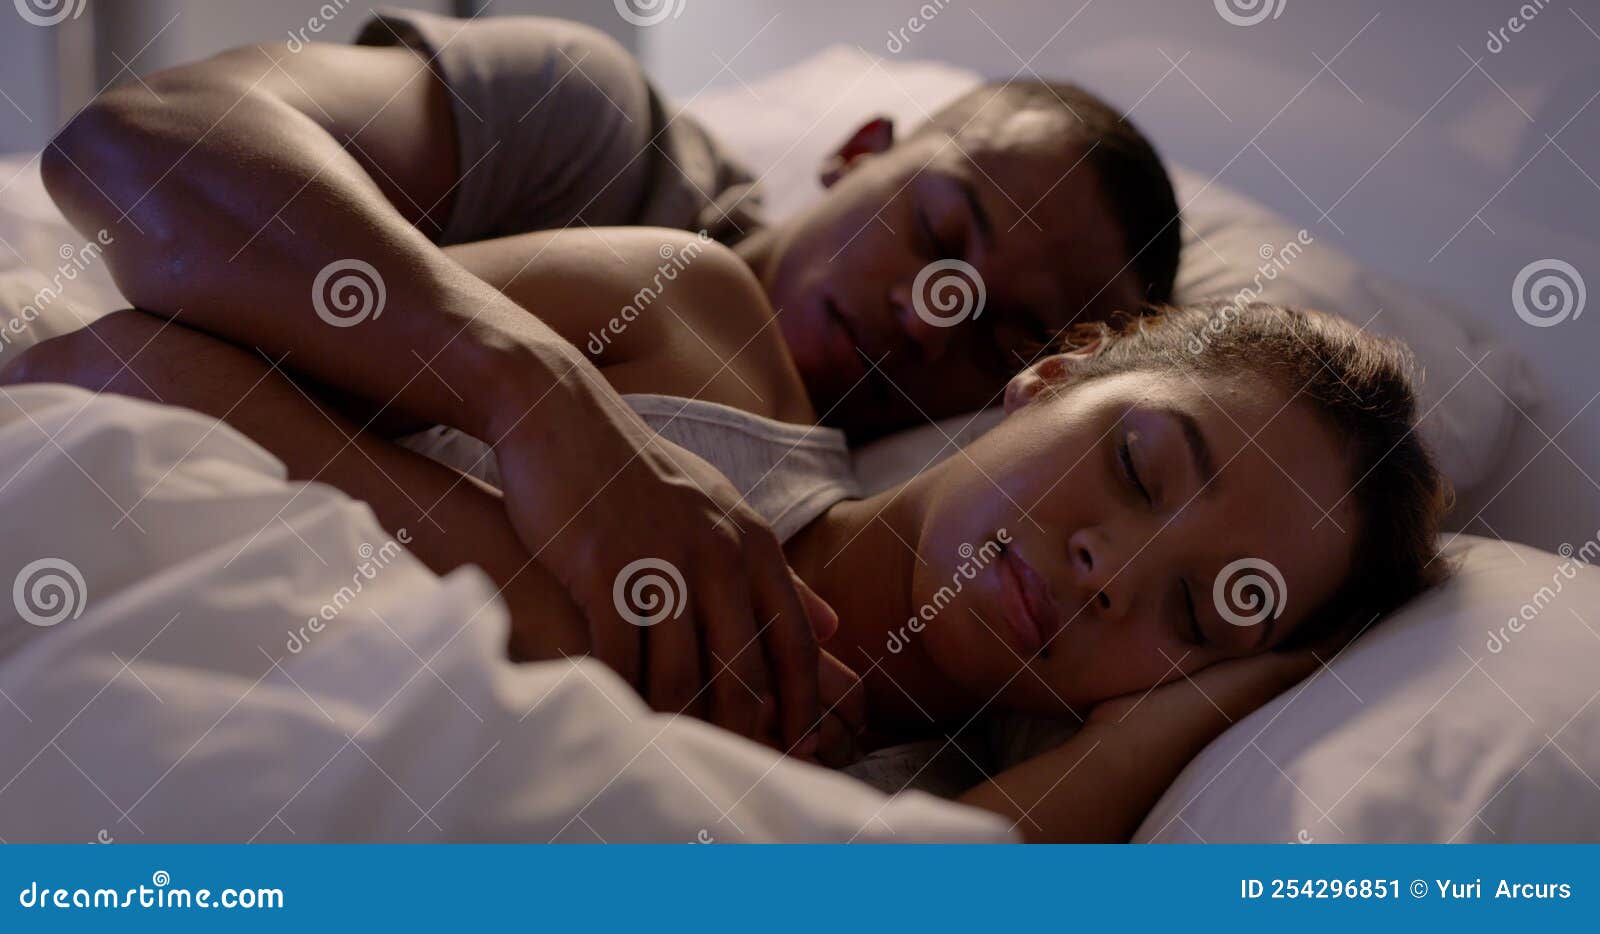 Young Love, Married Couple Sleeping in Bed, Husband and Wife Under Blanket at Night at Home